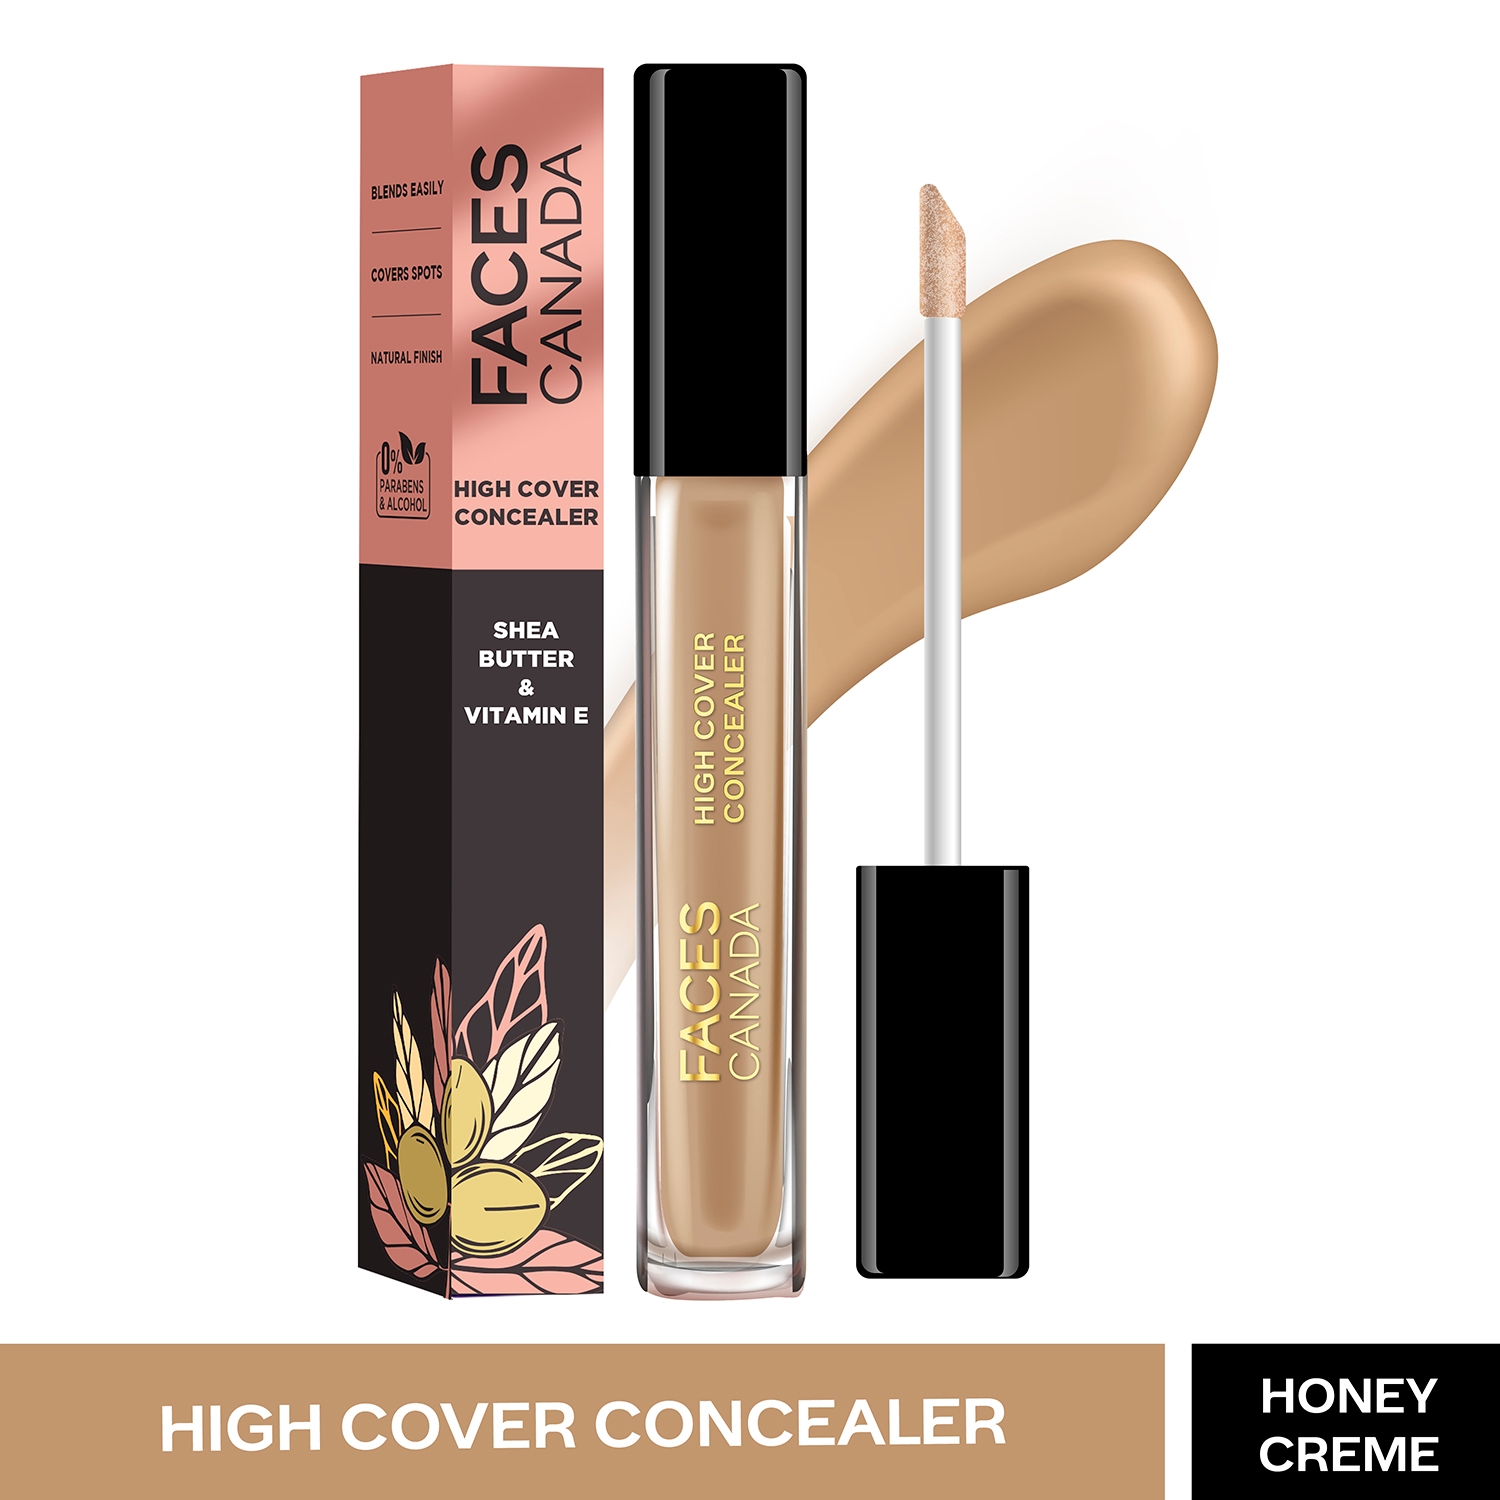 Faces Canada High Cover Concealer - 02 Honey Creme (4ml)